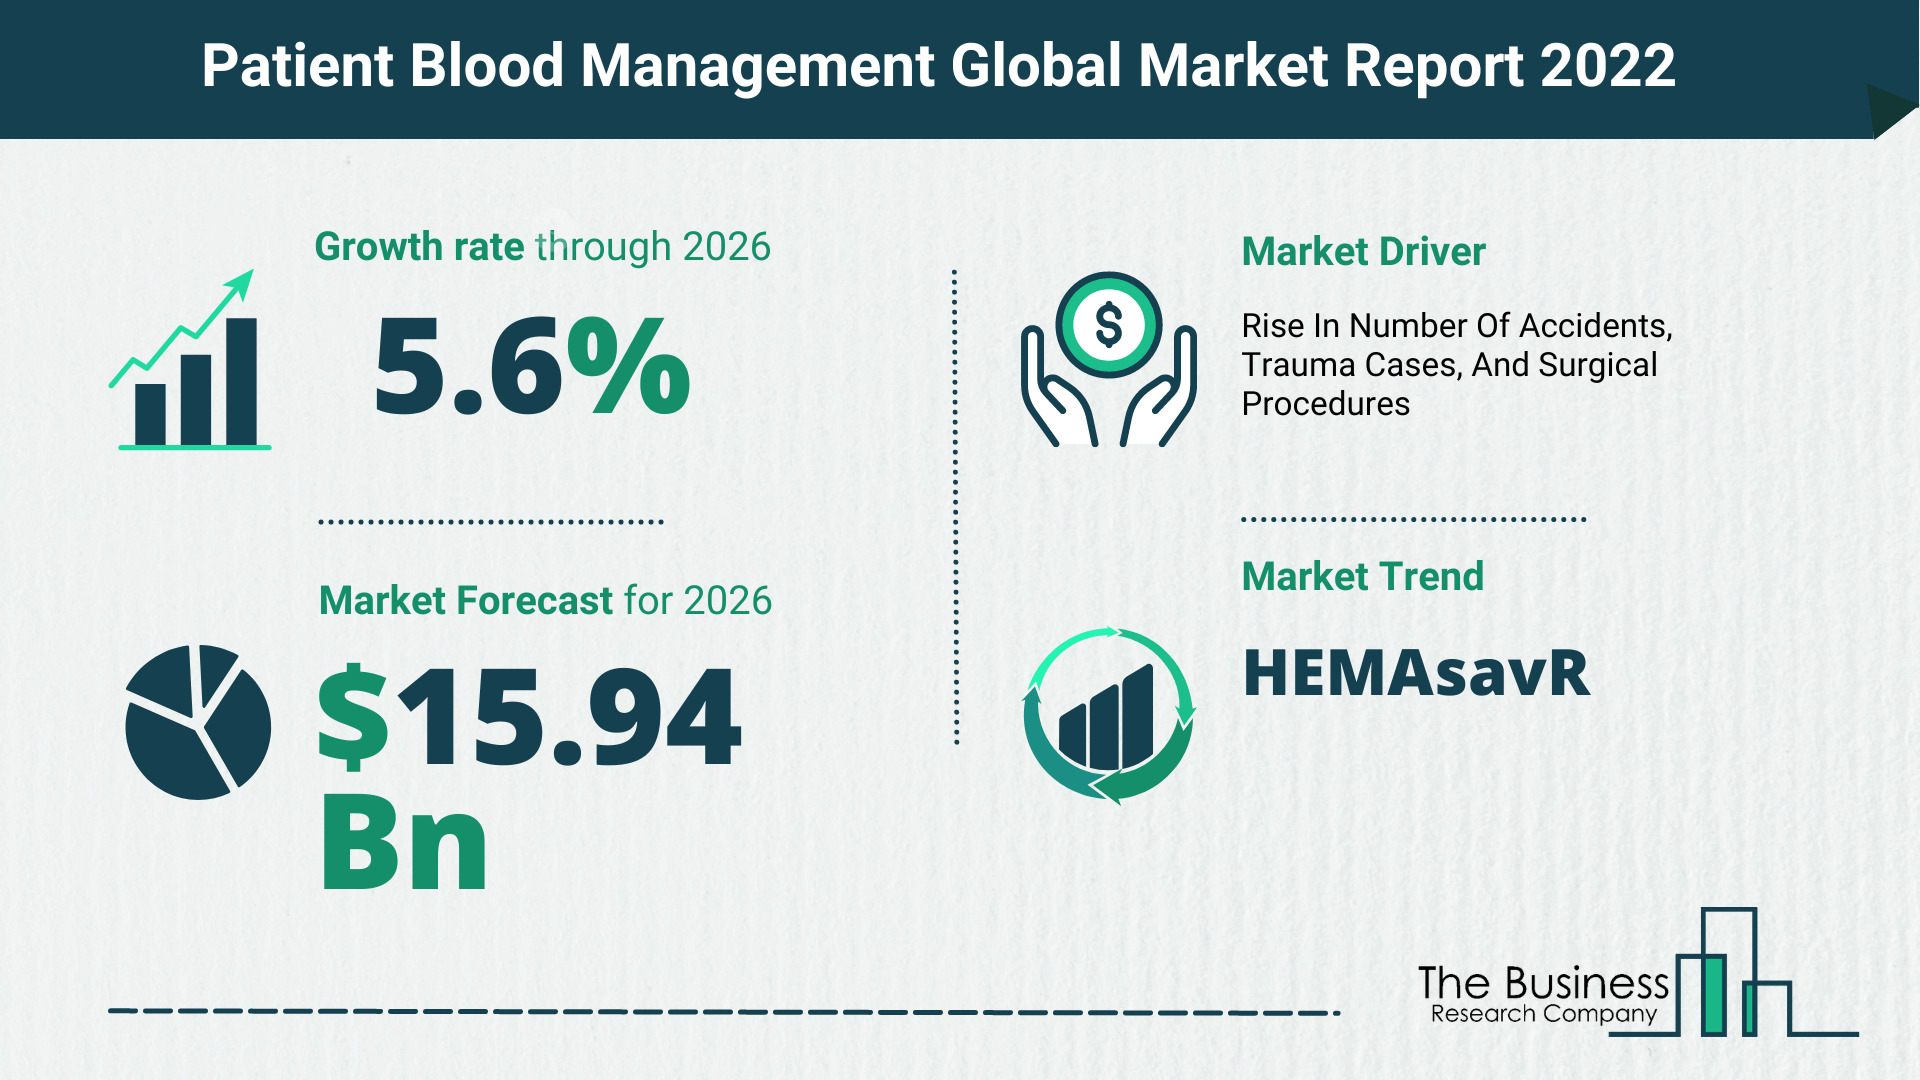 How Will The Patient Blood Management Market Grow In 2022?